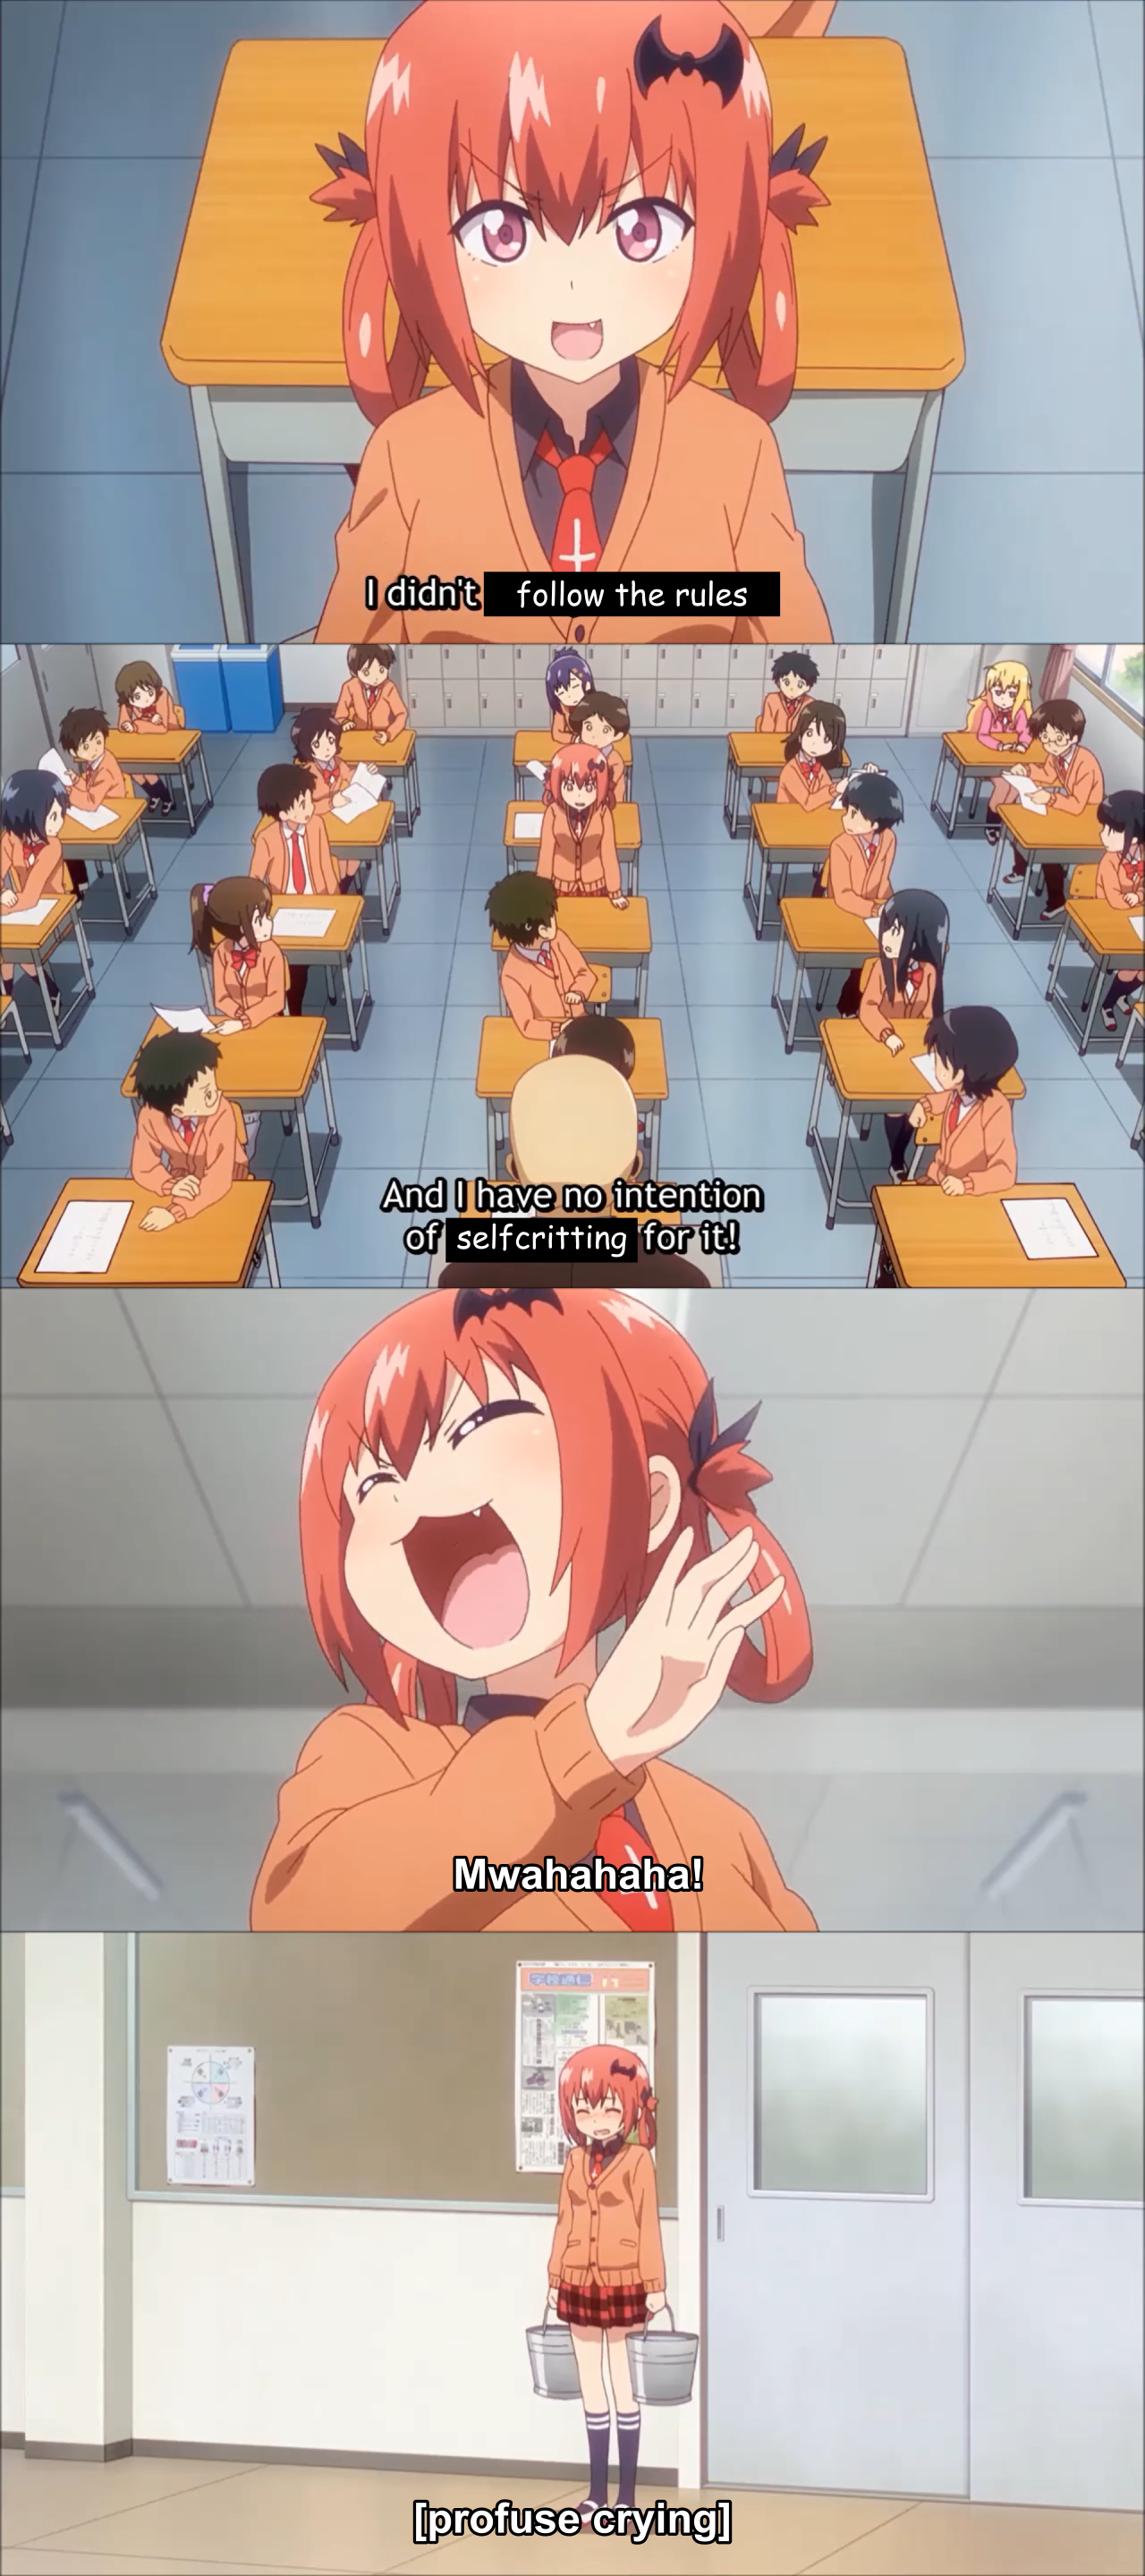 Four edited screencaps from the Gabriel Dropout anime. In the first, Satania sits at her school desk and says out loud with a smug expression, "I didn't follow the rules", where "follow the rules" is written in Comic Sans against a black background to indicate that it was edited in. The second screencap is a wide shot of the whole classroom, the camera above the teacher's head and centered on Satania. Satania continues, "And I have no intention of selfcritting for it.", the word "selfcritting" again clearly indicated to be edited in. The third screencap shows Satania laughing maniacally, with a cat-mouthed expression and her hand lifted in a cartoonish expression of evil; the fourth screencap shows Satania crying profusely, standing in the hallway beside the door to the classroom, holding two buckets of water as punishment.